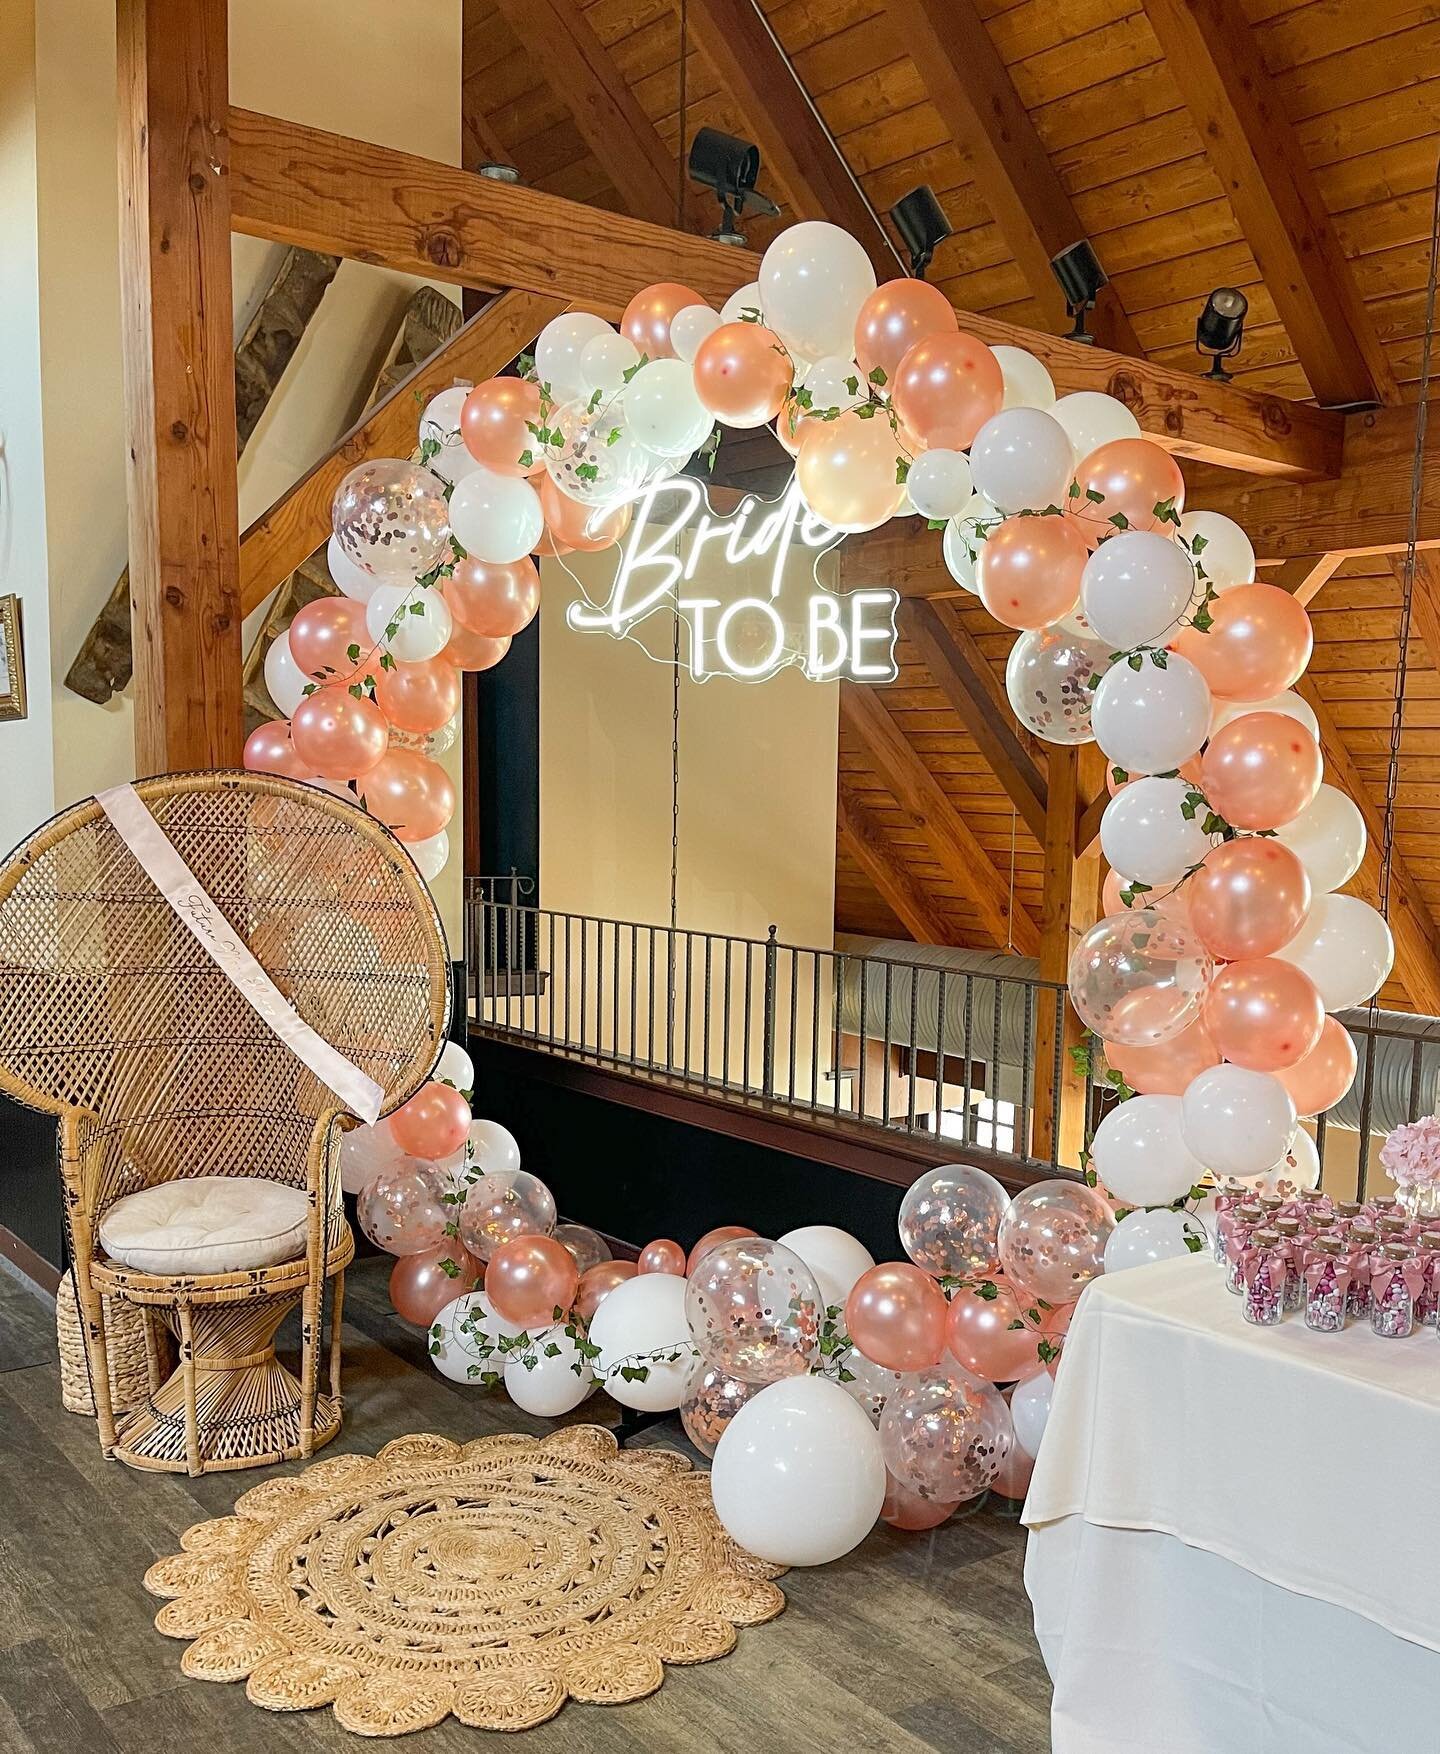 Bride to be is SO loved!!! 🥹🌸💖 We had fun assisting in the vision of this shower! 

Featured: Black Circle Arch, Bride to be Neon, Peacock, Boho Rug, &amp; Rattan floor vase ✨ 
Venue: @cbmccsrthy